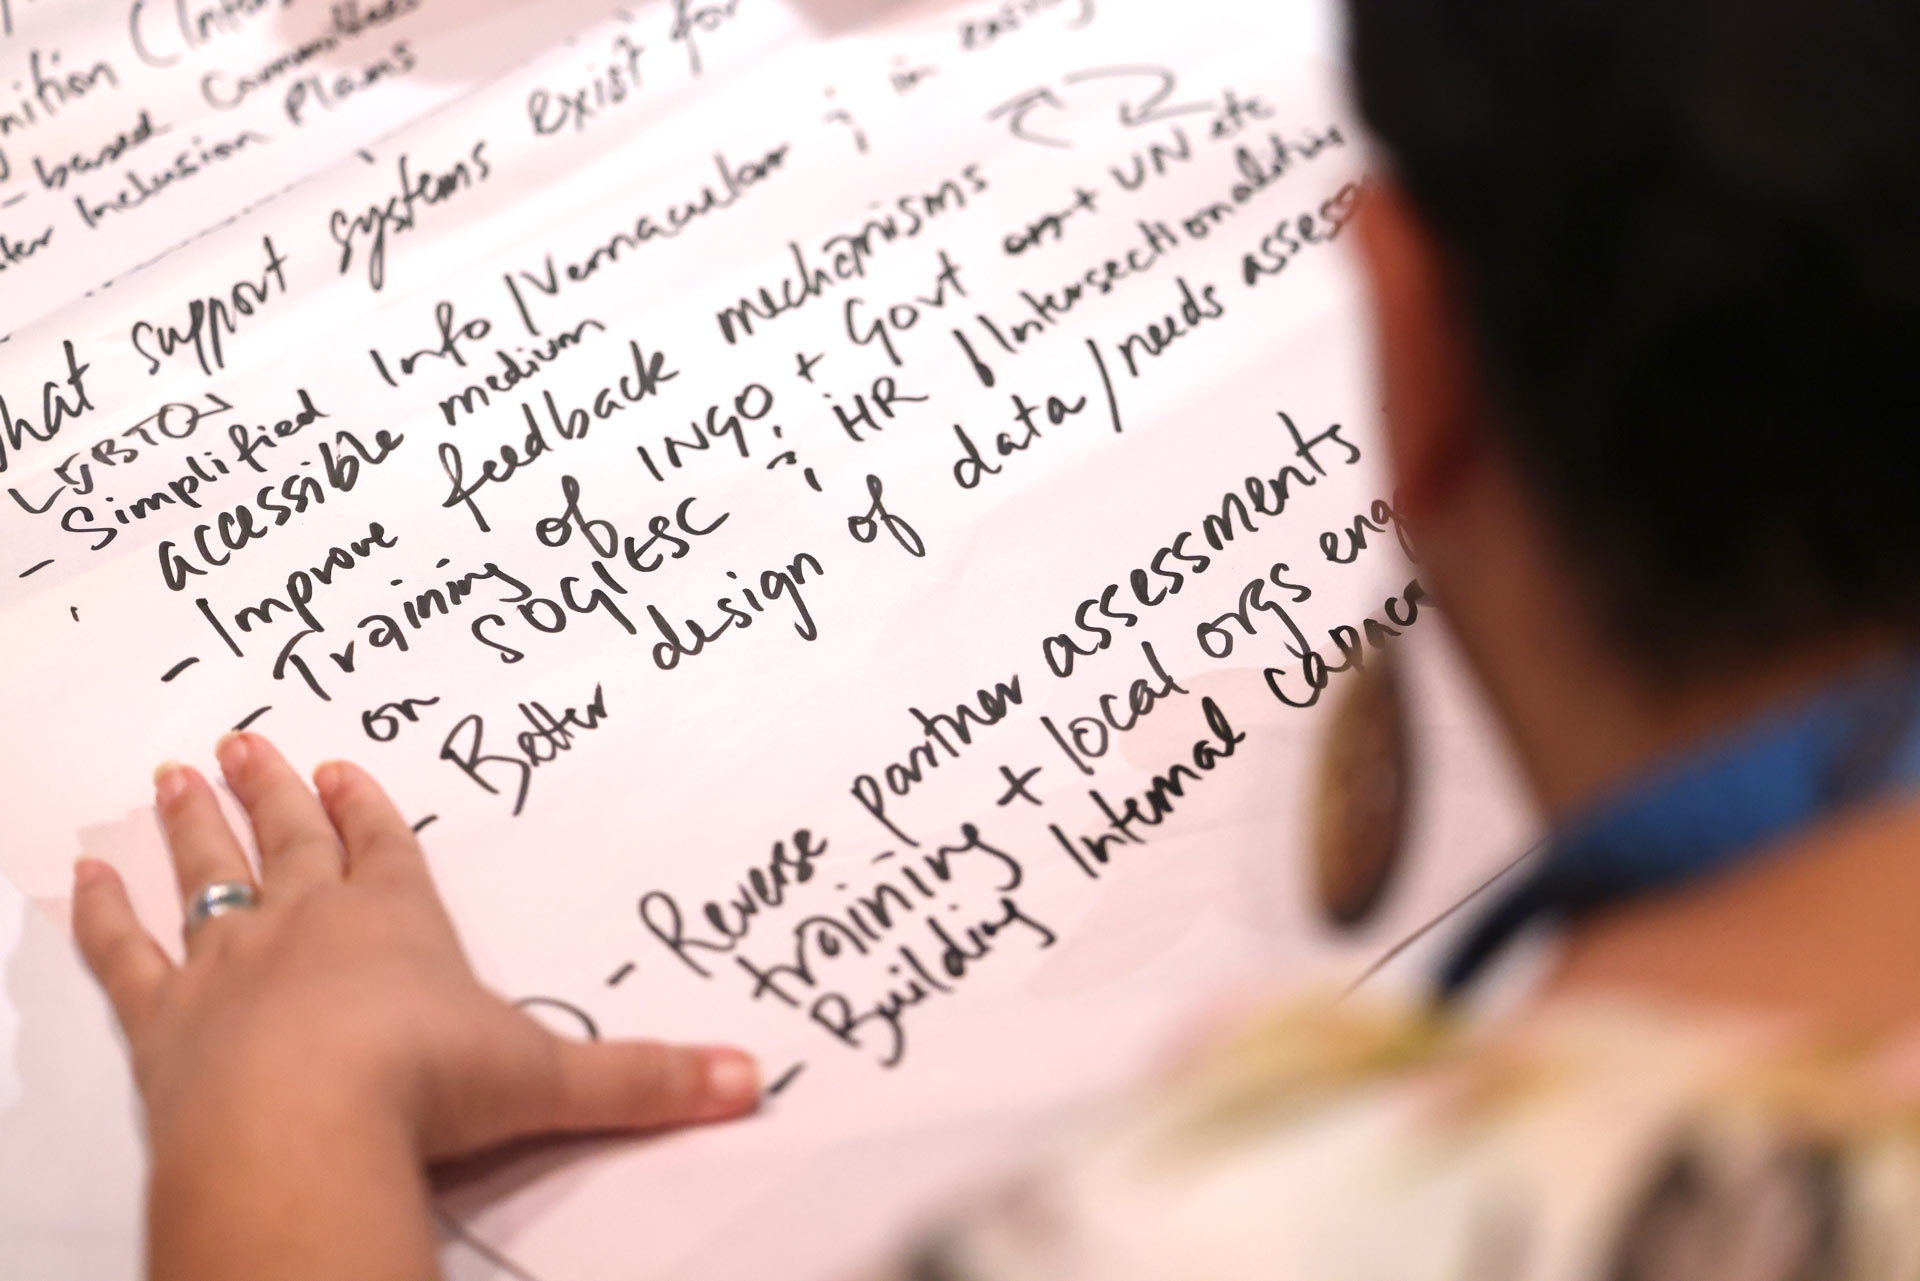 A photo of a woman writing notes on a paper board.